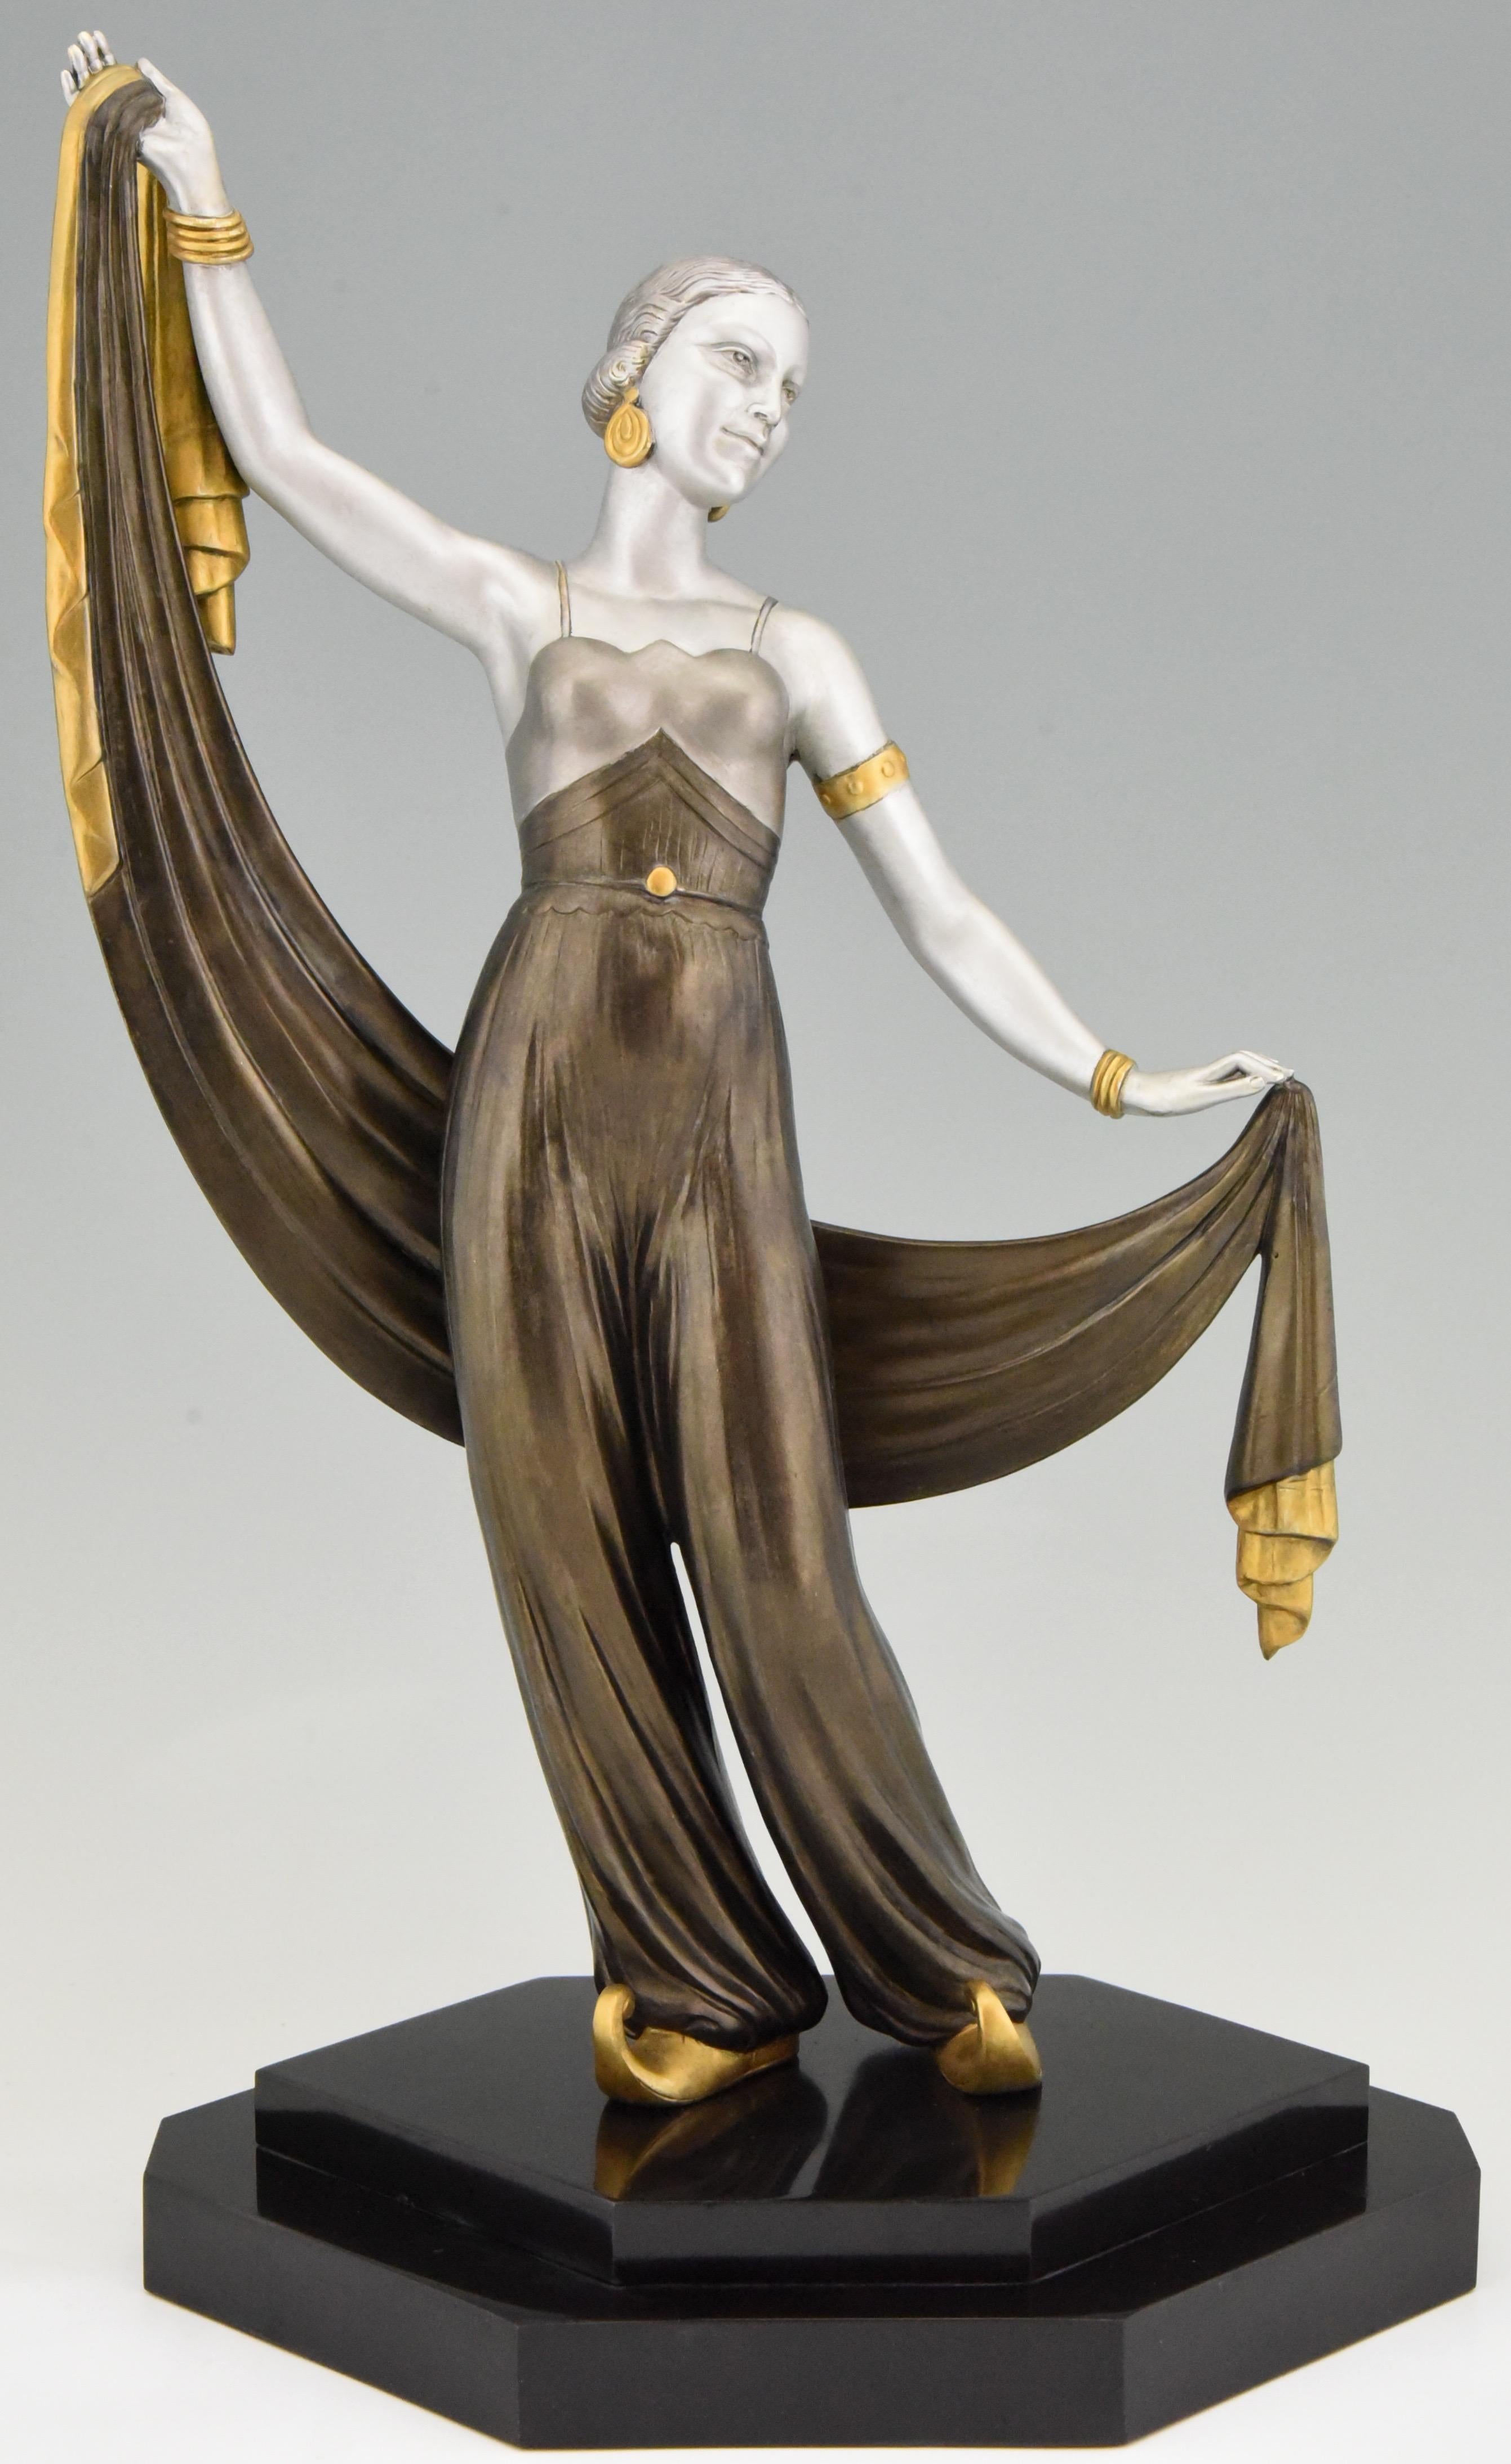 Tall Art Deco sculpture of an orientalist harem dancer with scarf mounted on a Belgian black marble plinth. The sculpture has a lovely multi-color patina and is signed Salvador, France, 1930.